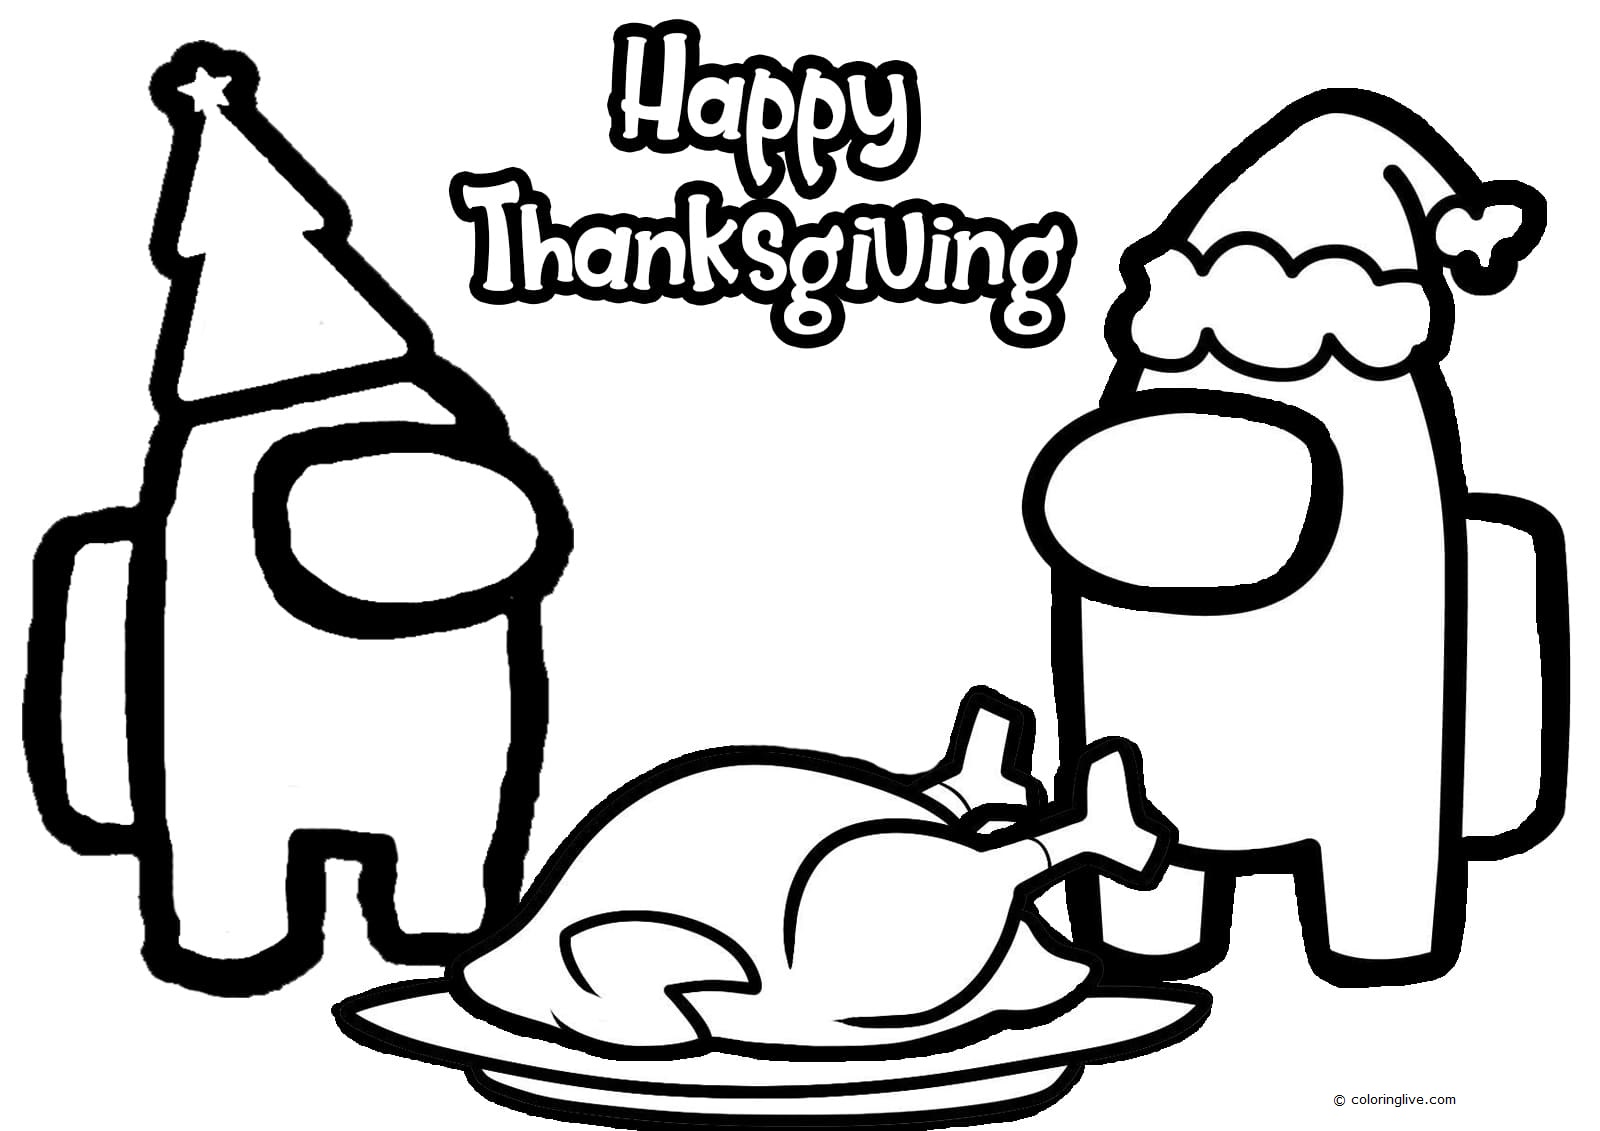 Printable Happy Thanksgiving Chicken Coloring Page for kids.